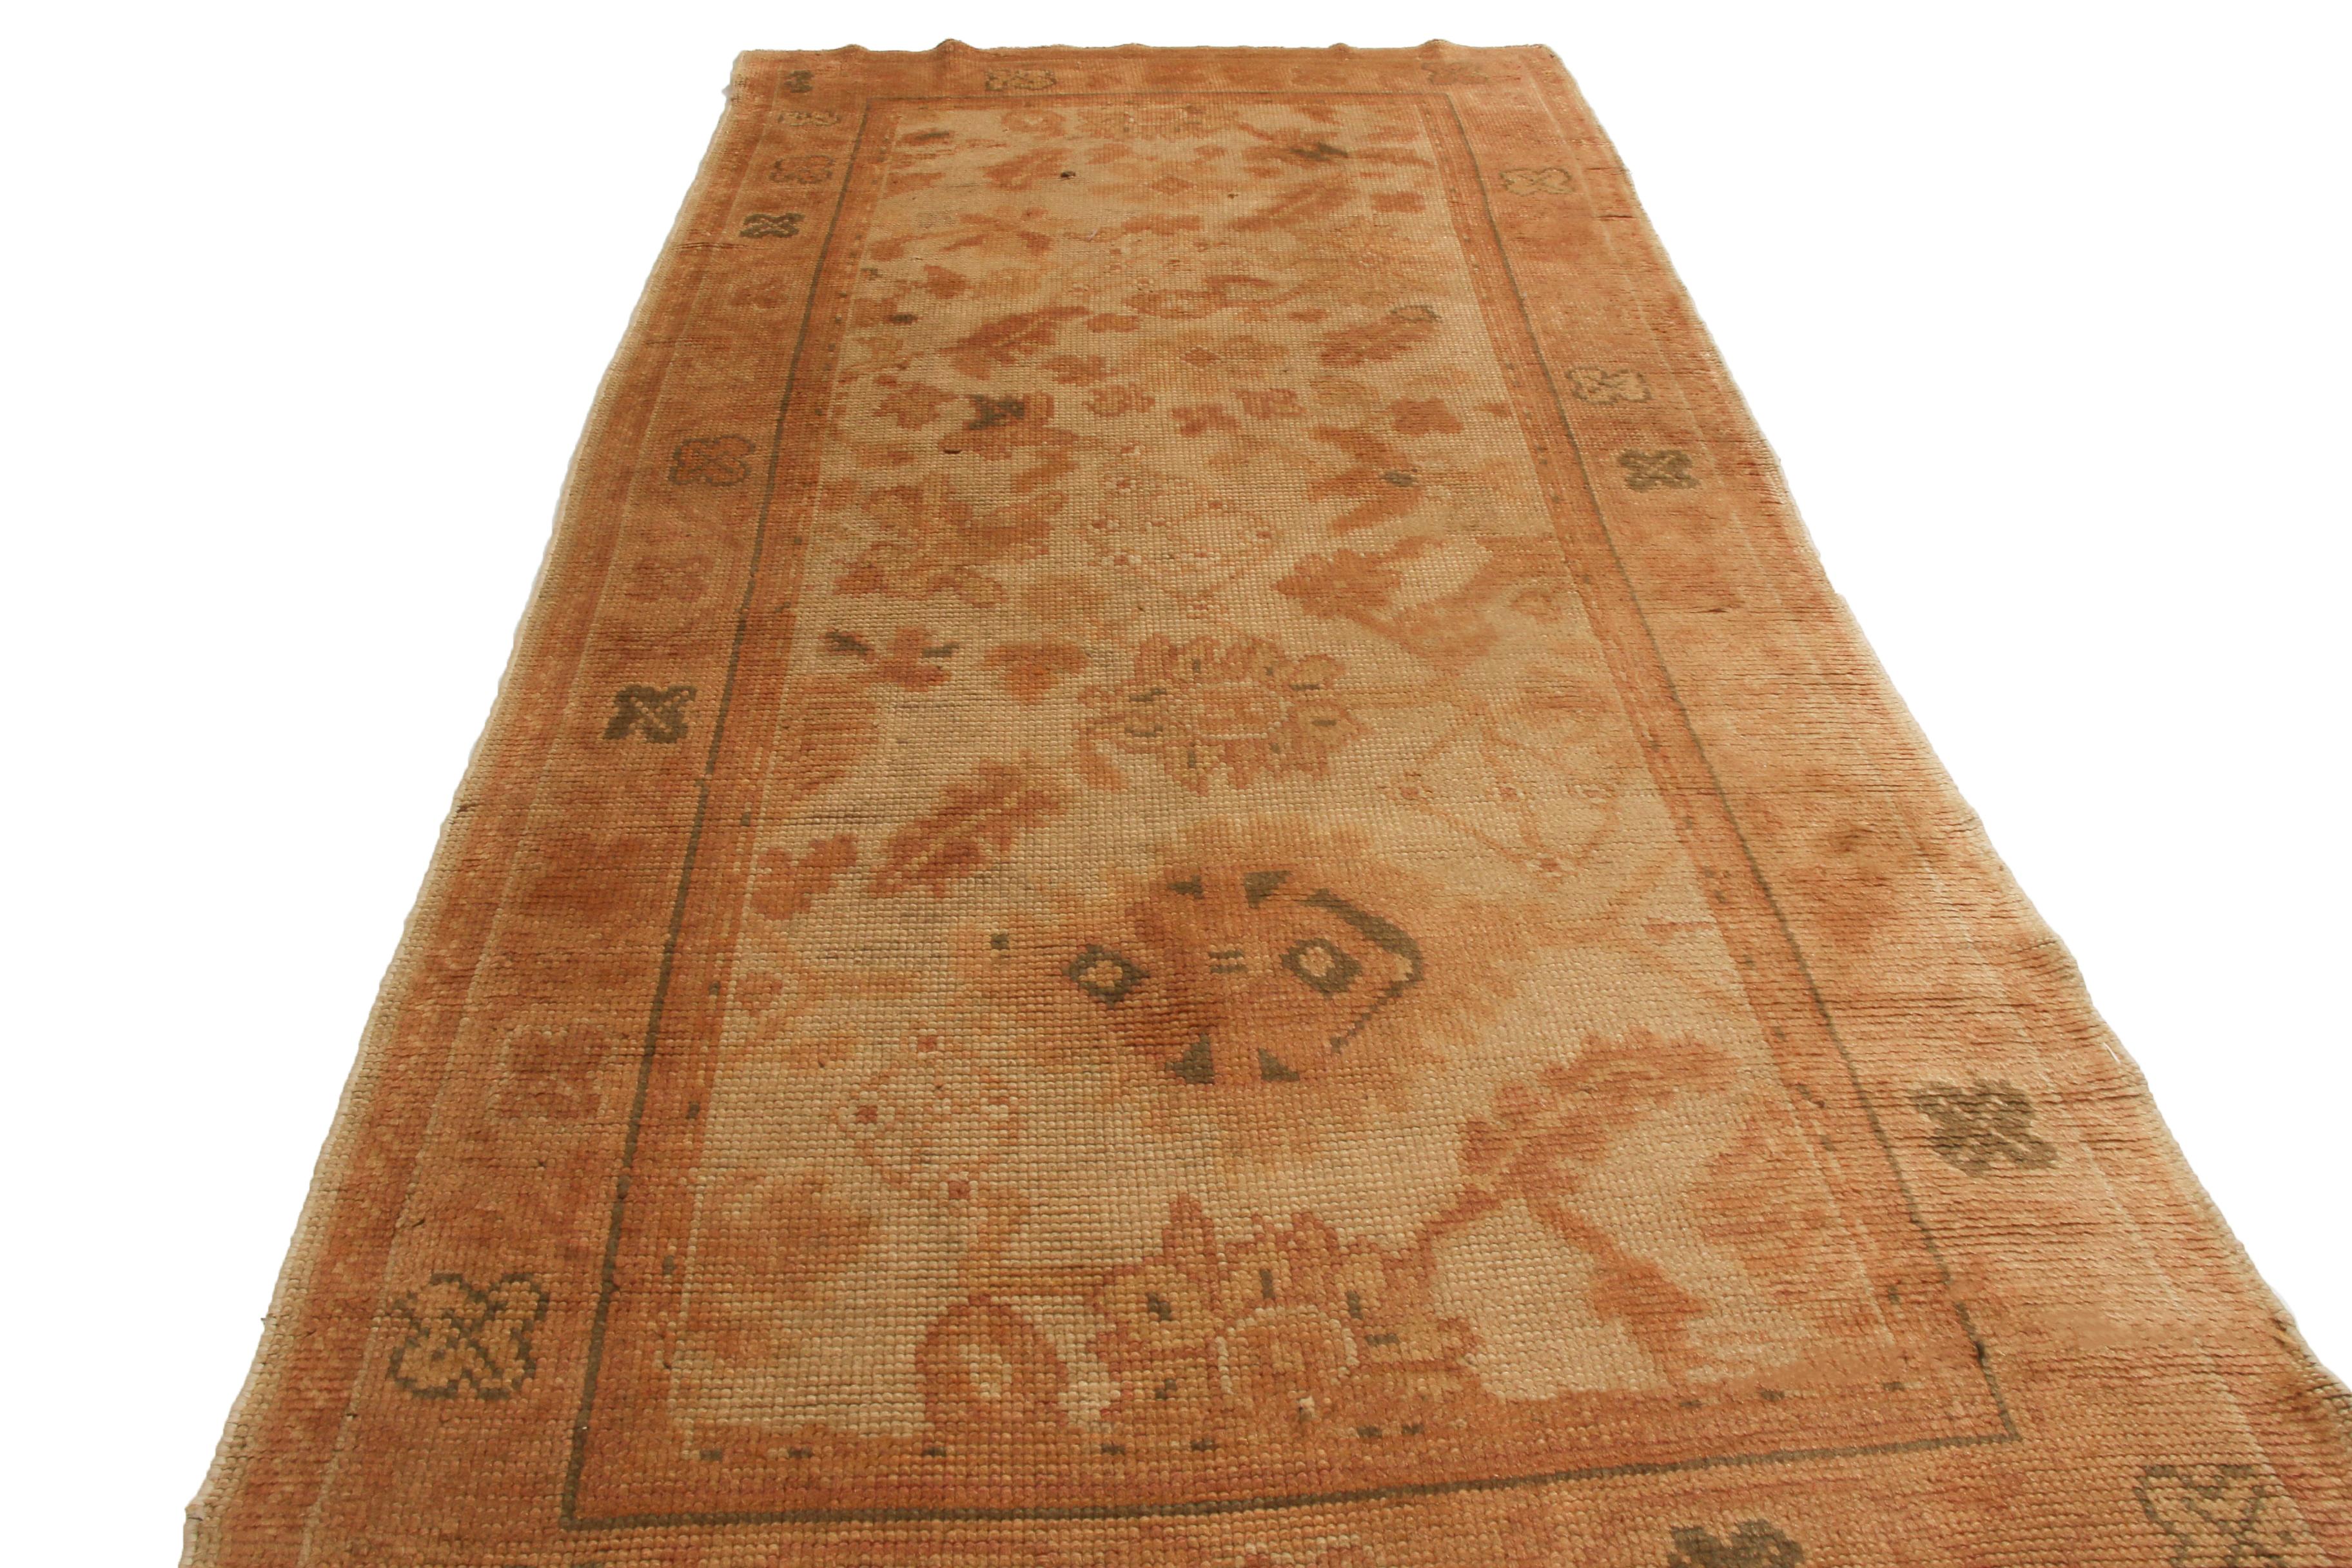 Originating from Ireland in 1890, this antique runner features a distinct Continental design, denoting a varied, traveled array of influences from various tribal regions of the 19th century. Hand-knotted in high-quality wool, the salmon-pink floral